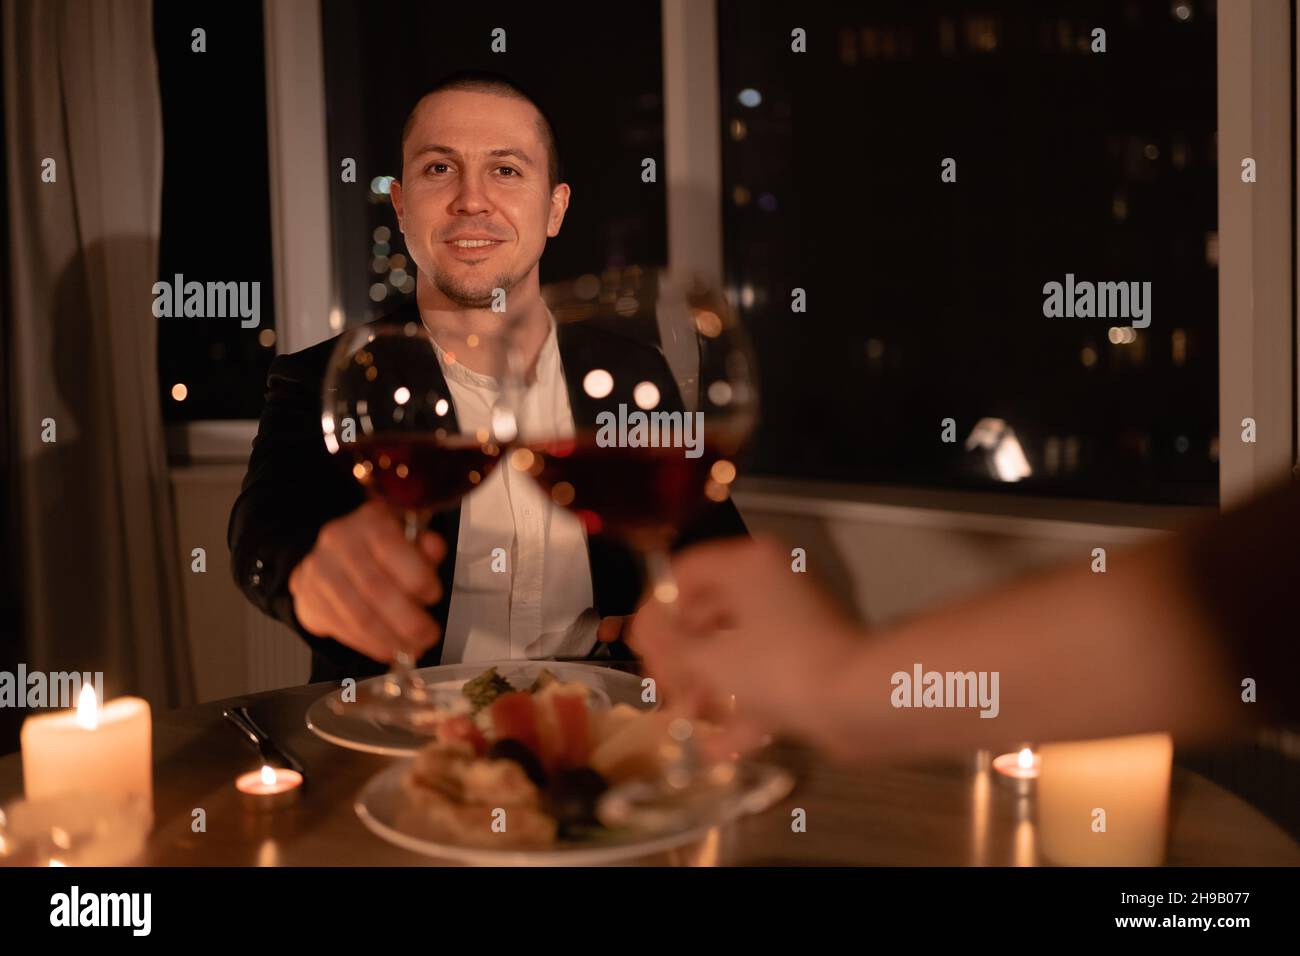 dinner valentines day, couple hands with glass of wine, evening of love at home together, date after work, wedding anniversary dine with alcohol Stock Photo